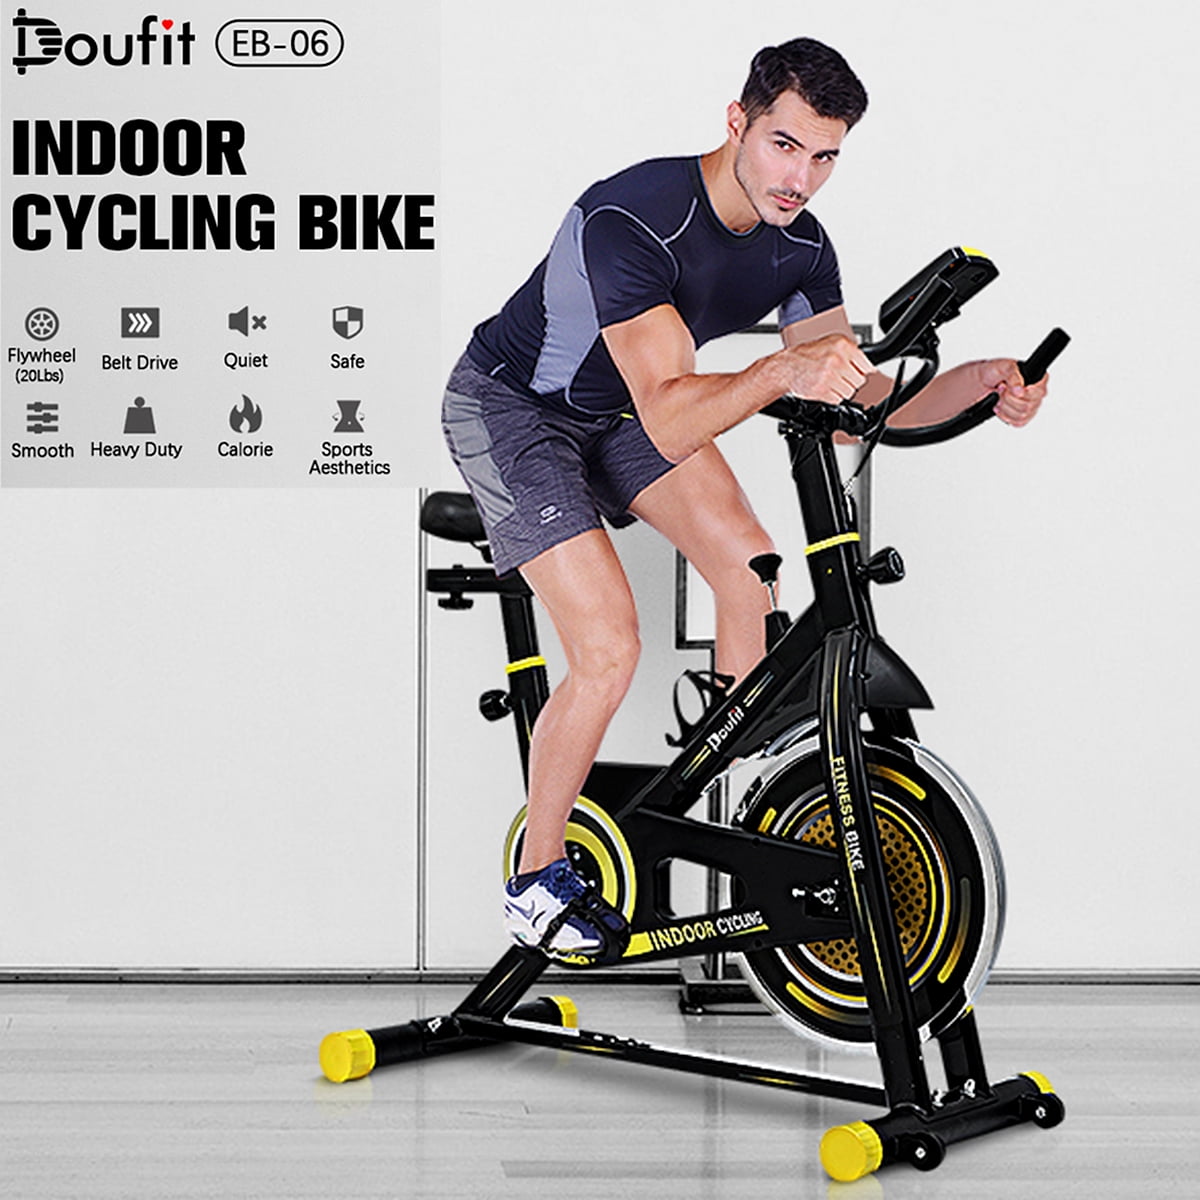 Fitness Workout Bike Exercise Bike Bicycle Gym Trainer Indoor Display Spor 